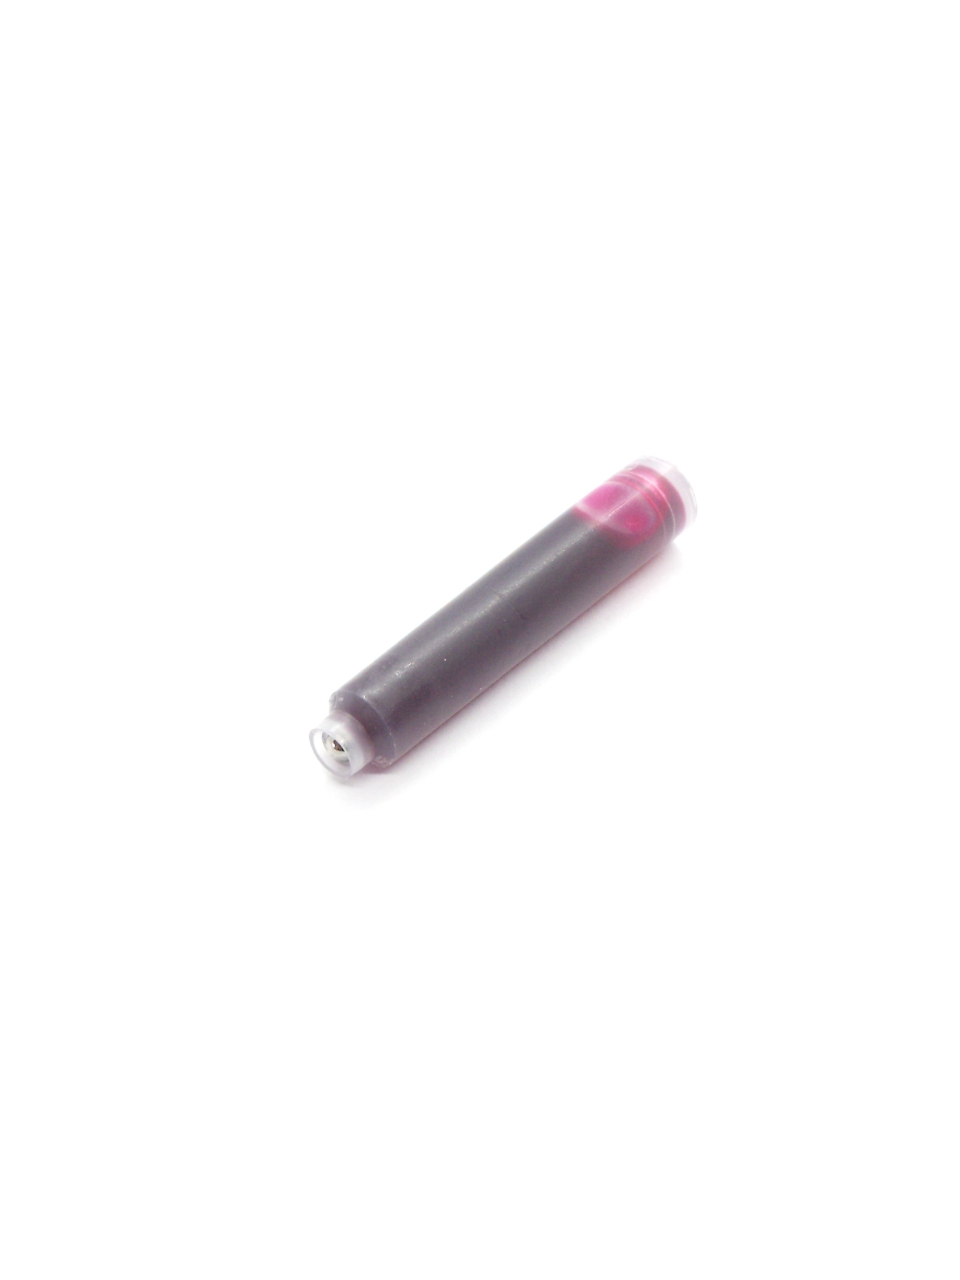 Cartridges For Itoya Fountain Pens (Pink)